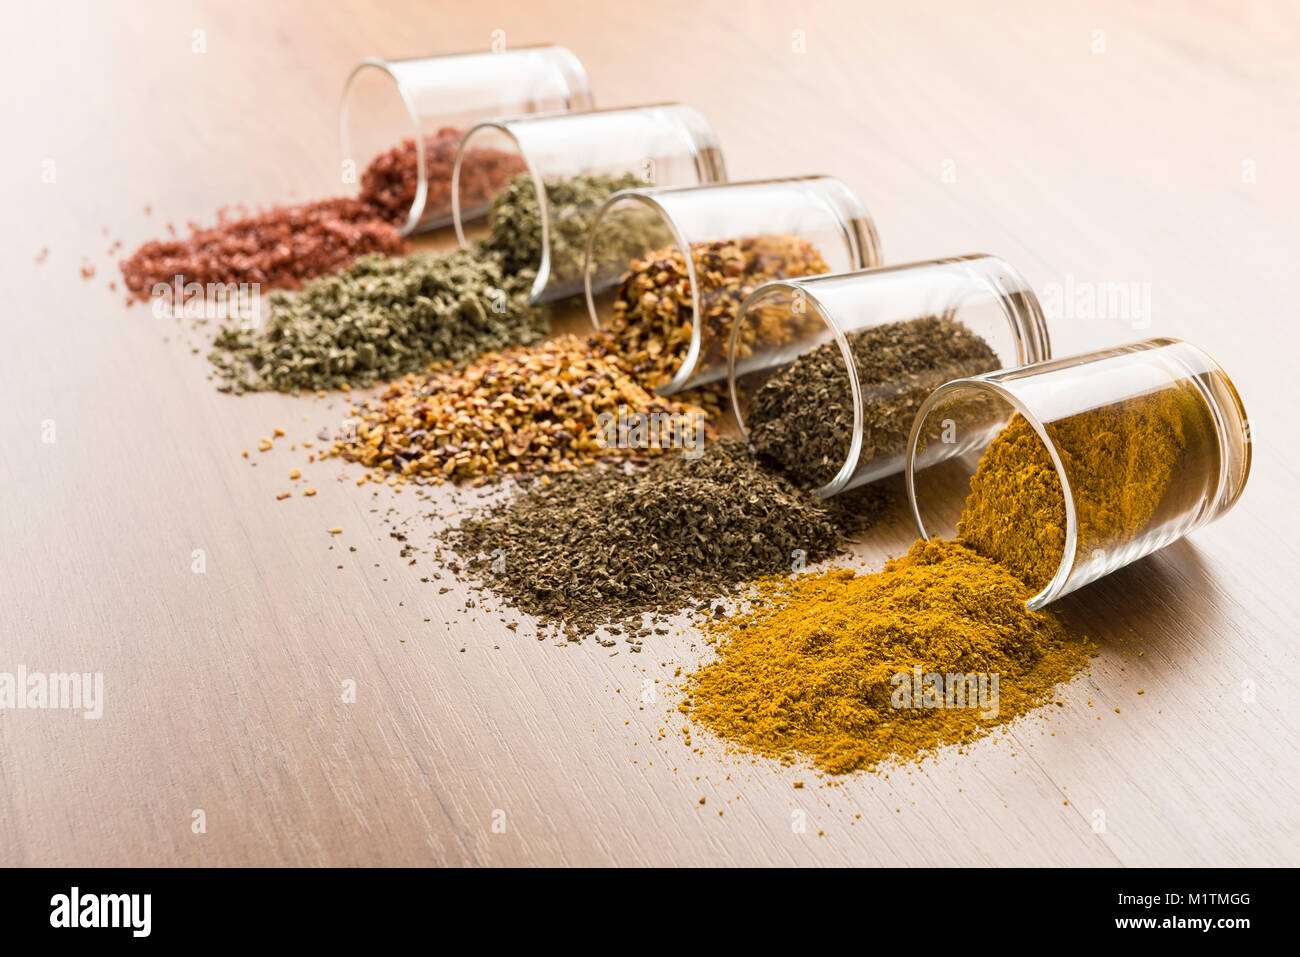 glass jars with various spices on wooden table Stock Photo